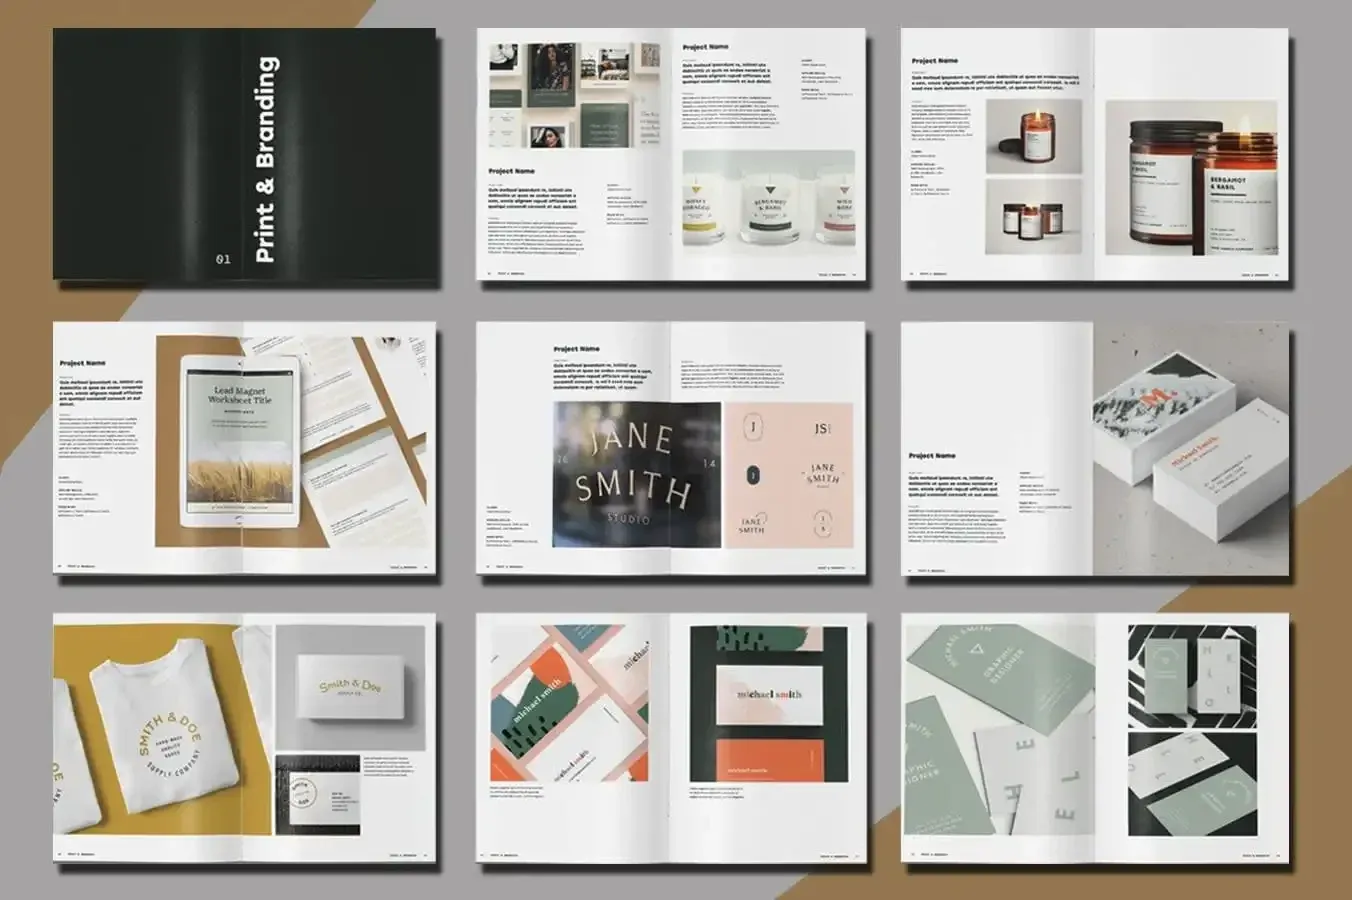 Pages of a "print & branding" magazine on grey and brown background.